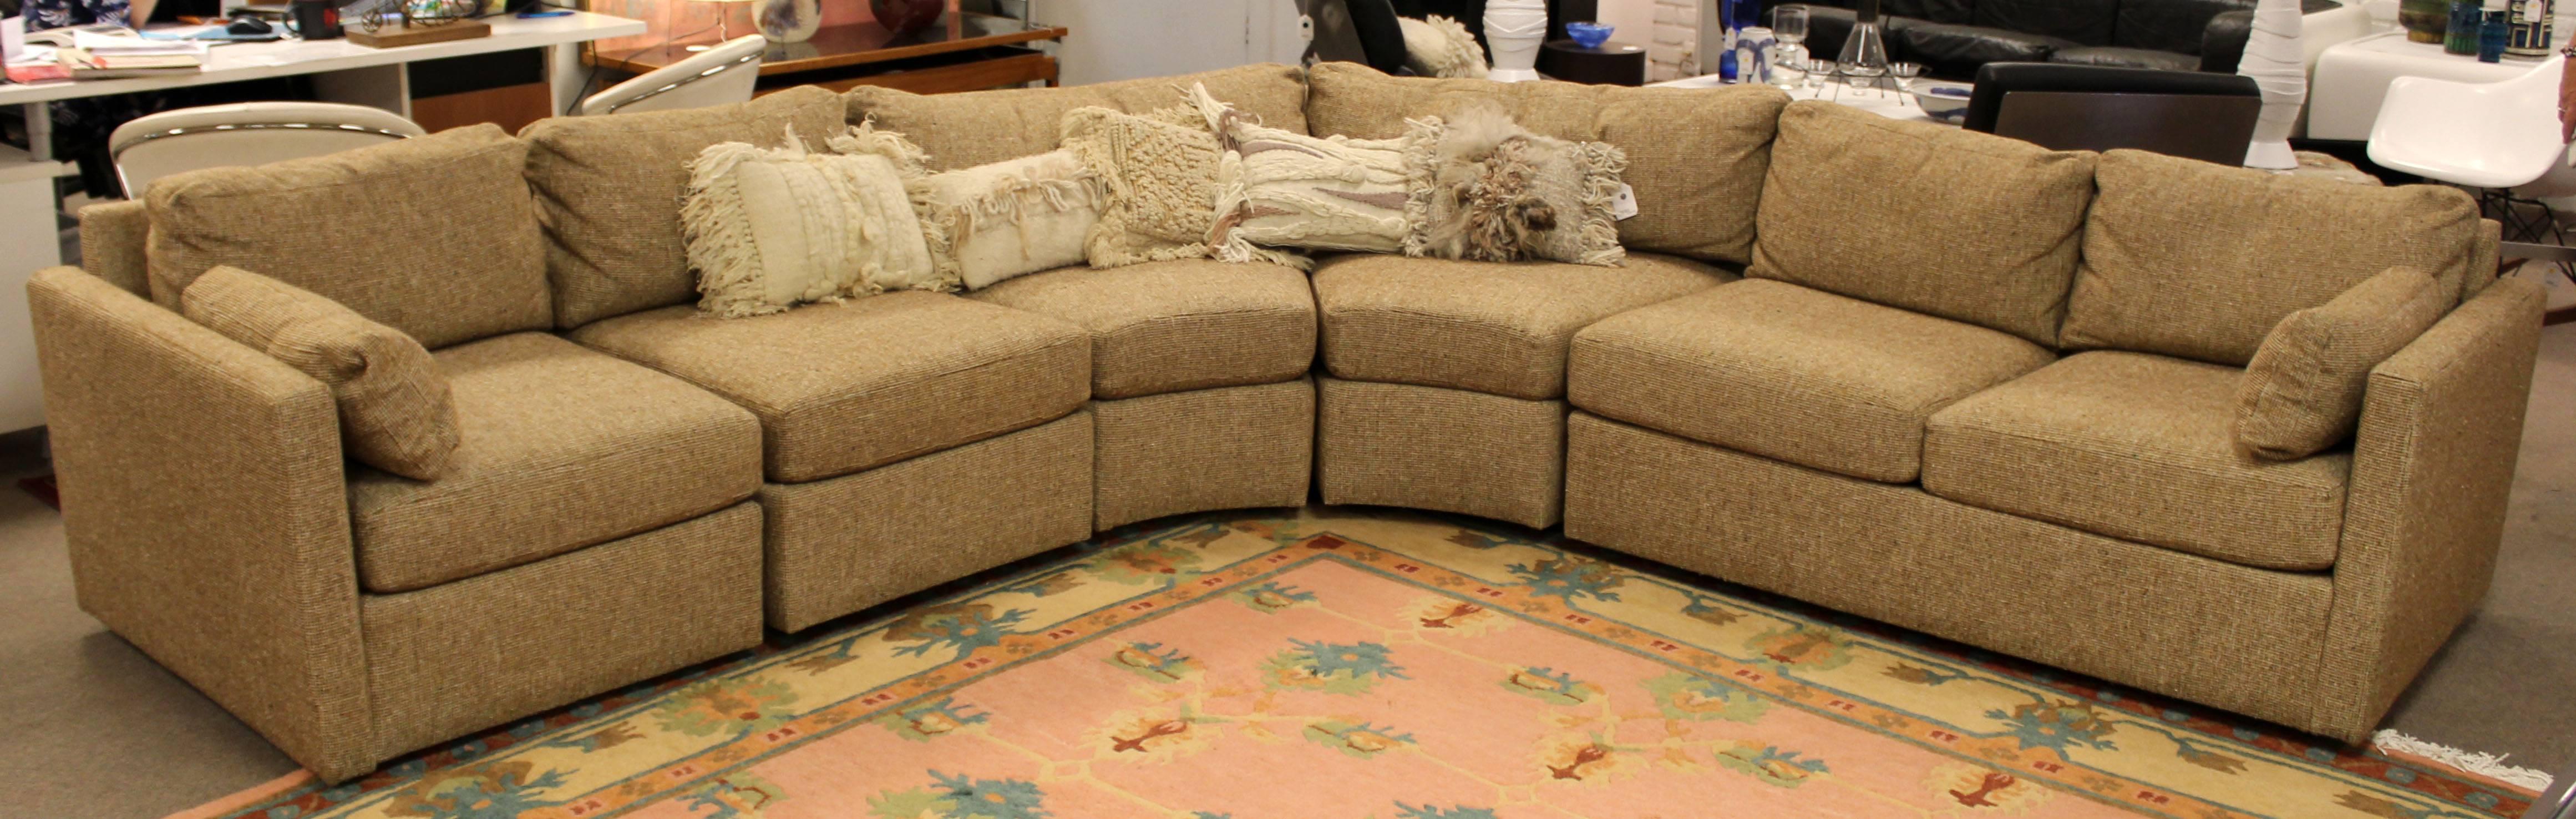 drexel heritage sectional